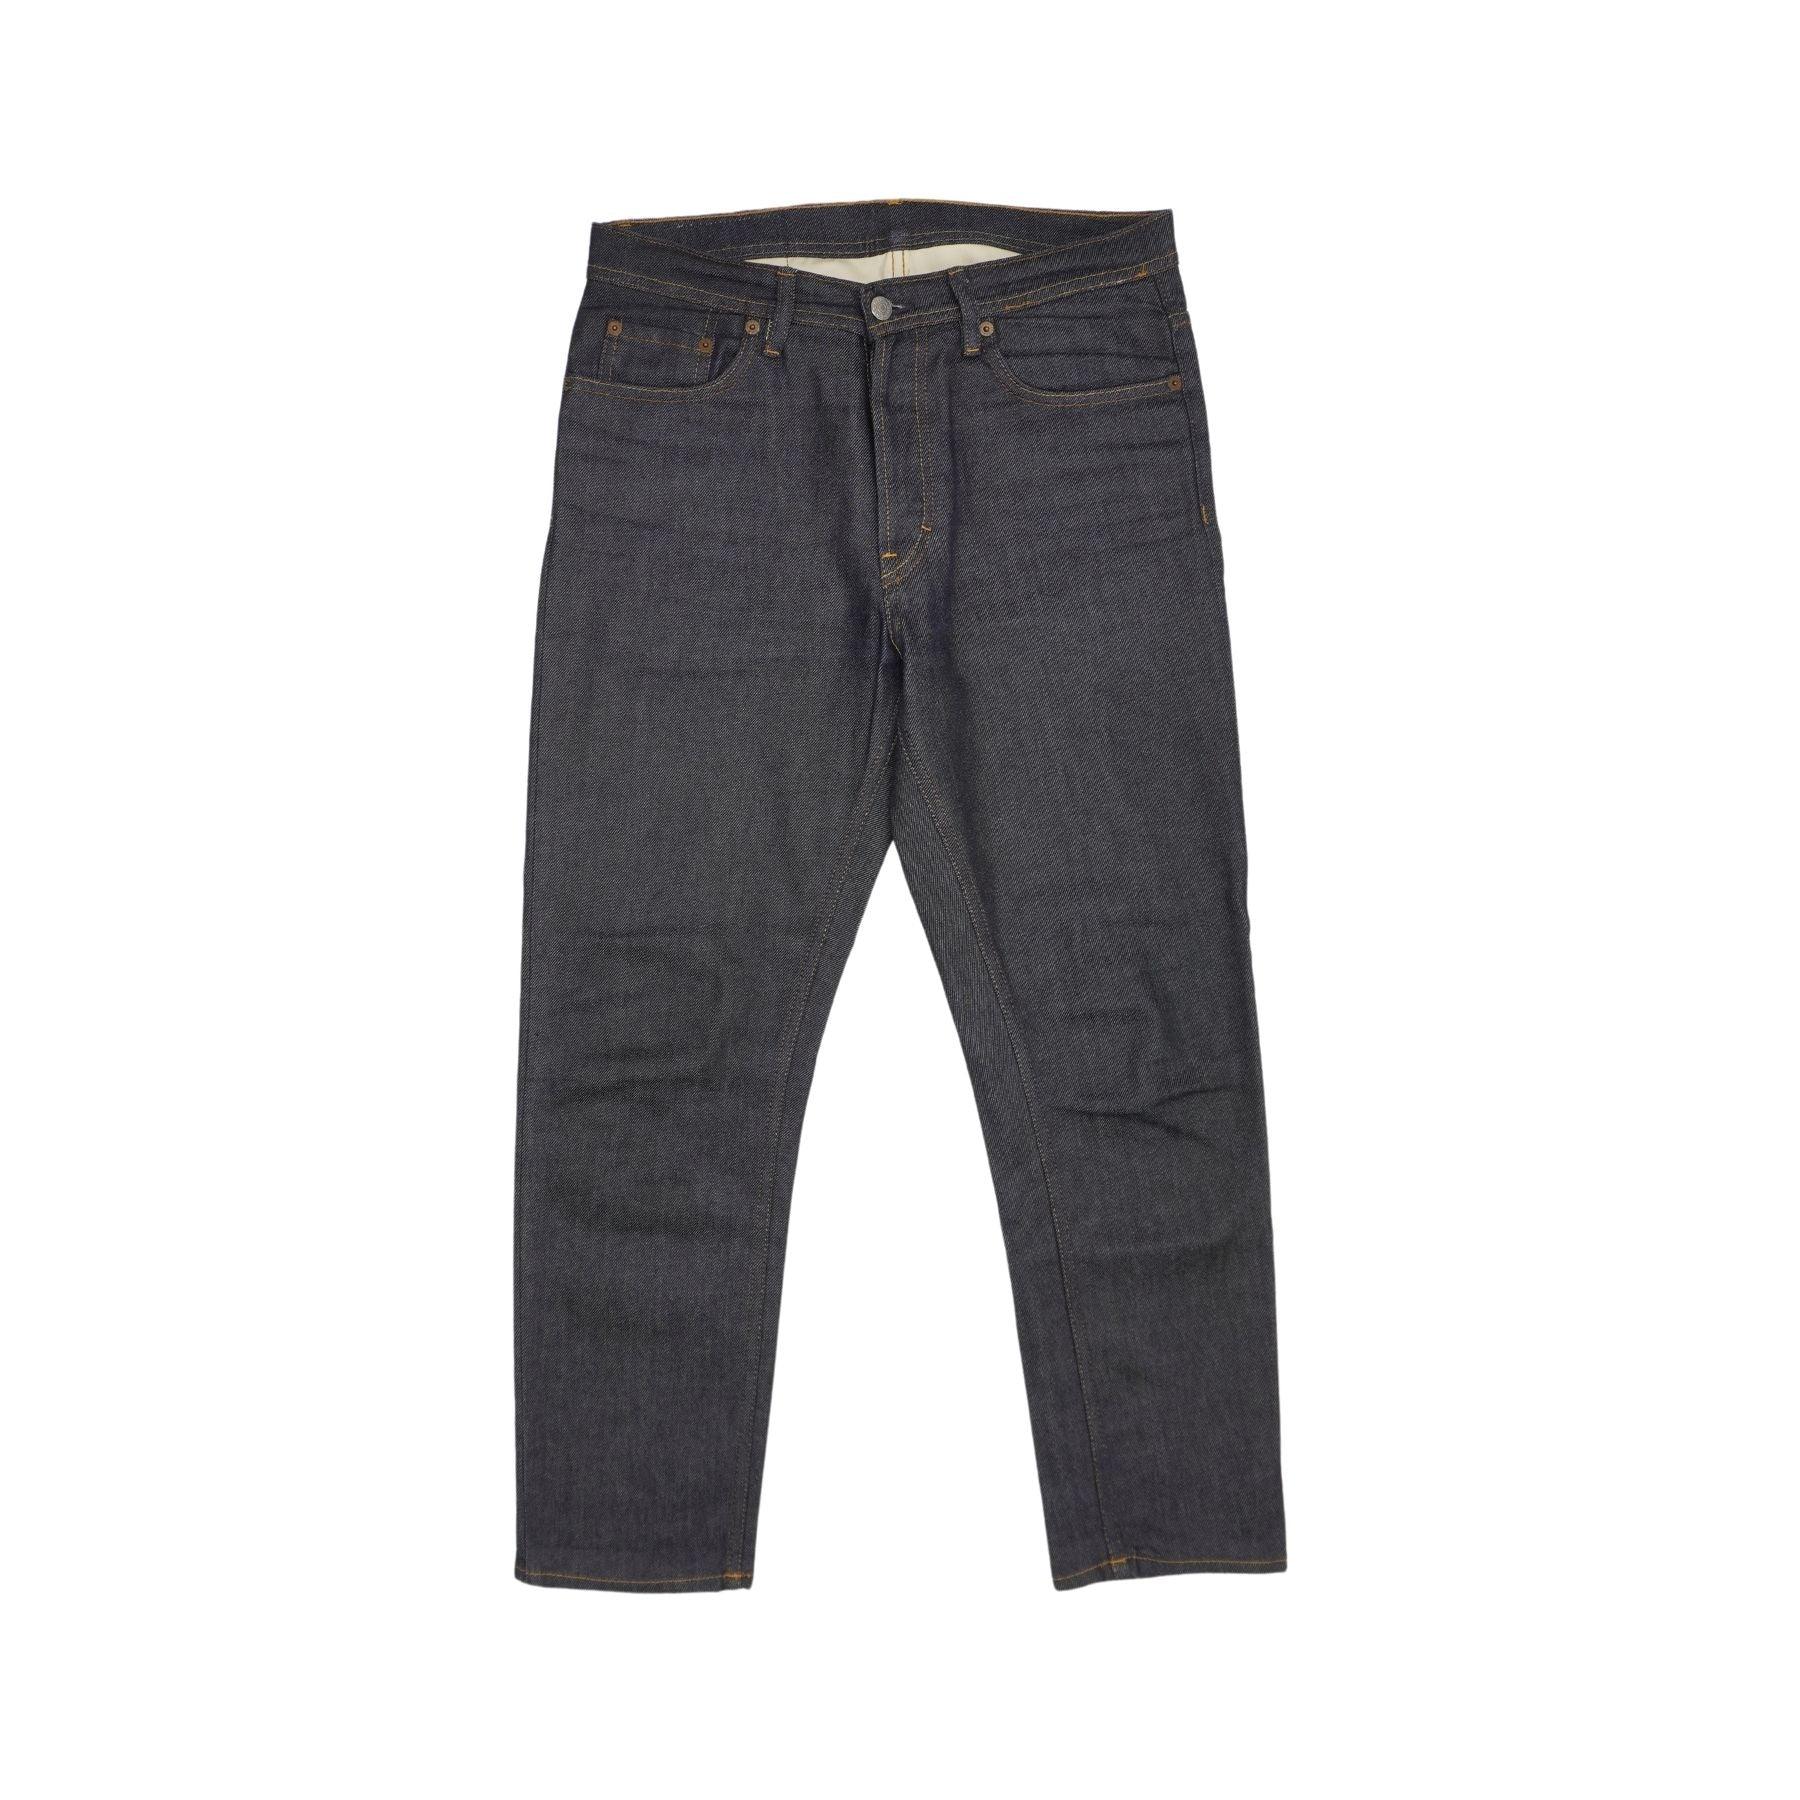 Acne Jeans - Men's 30 - Fashionably Yours